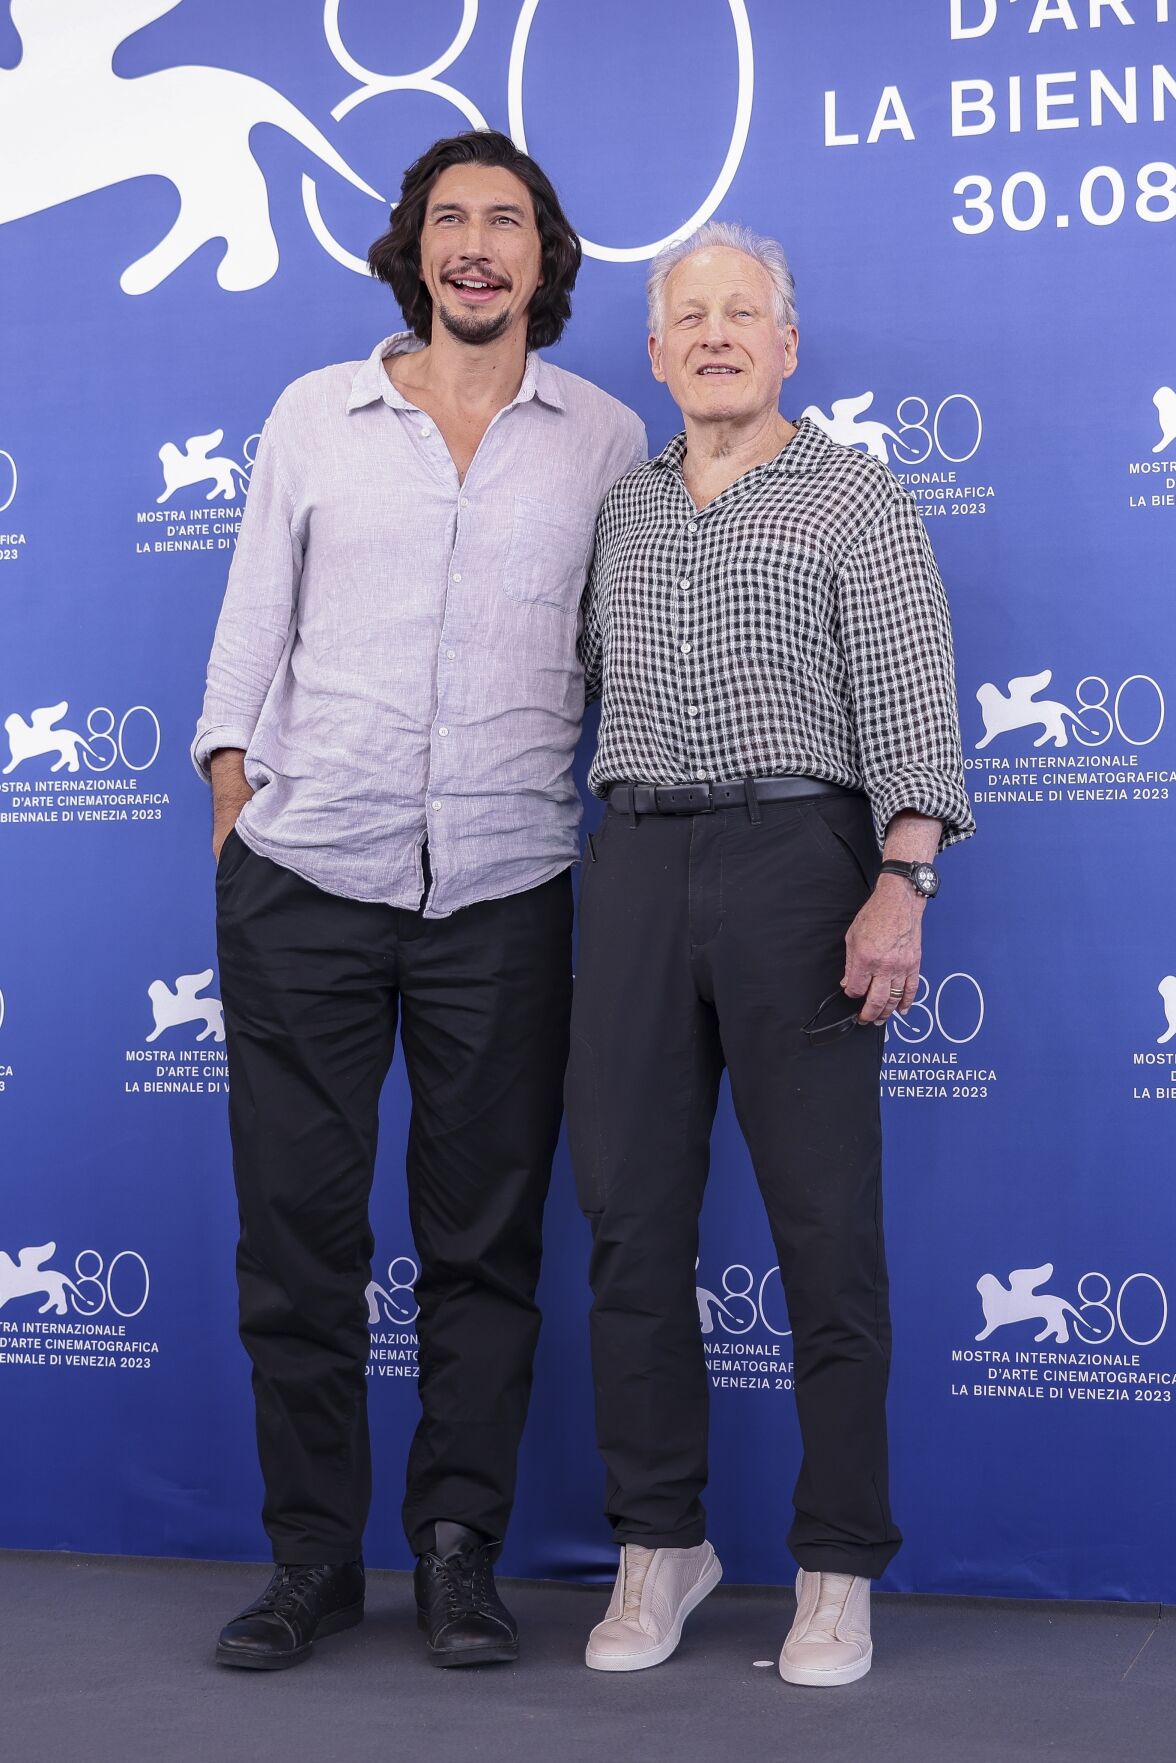 Adam Driver and director Michael Mann attend a photocall for the movie "Ferrari" at the 80th Venice International Film Festival on August 31, 2023 in Venice, Italy. 